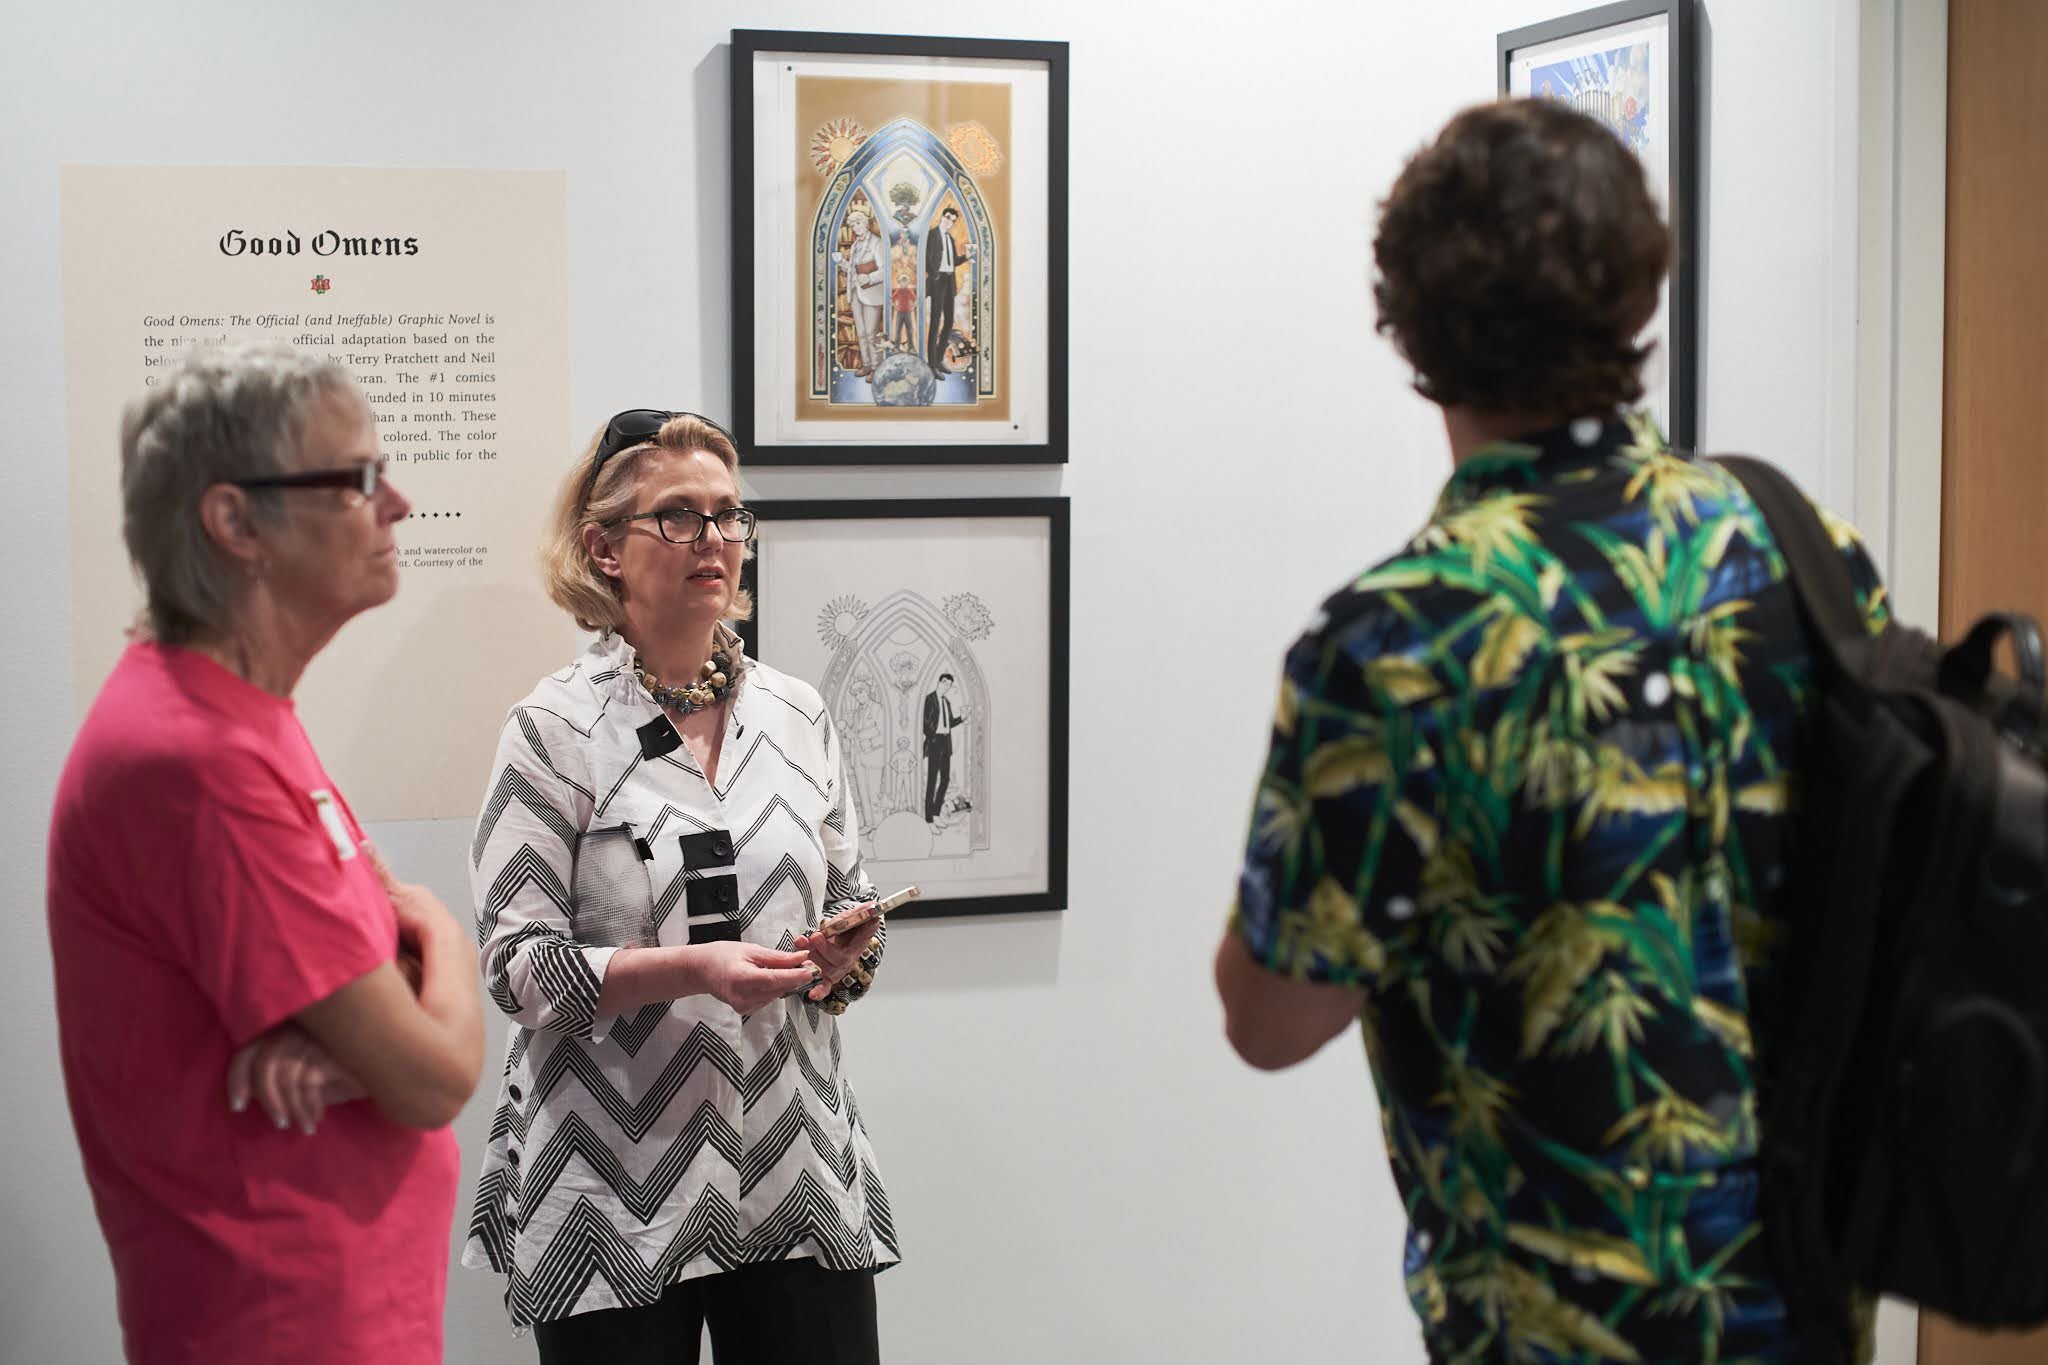  Colleen talks with visitors about  Good Omens . at the SDCC Museum member preview event on 11/3/23. Photo: N. Ricoy © 2023 SDCC. 